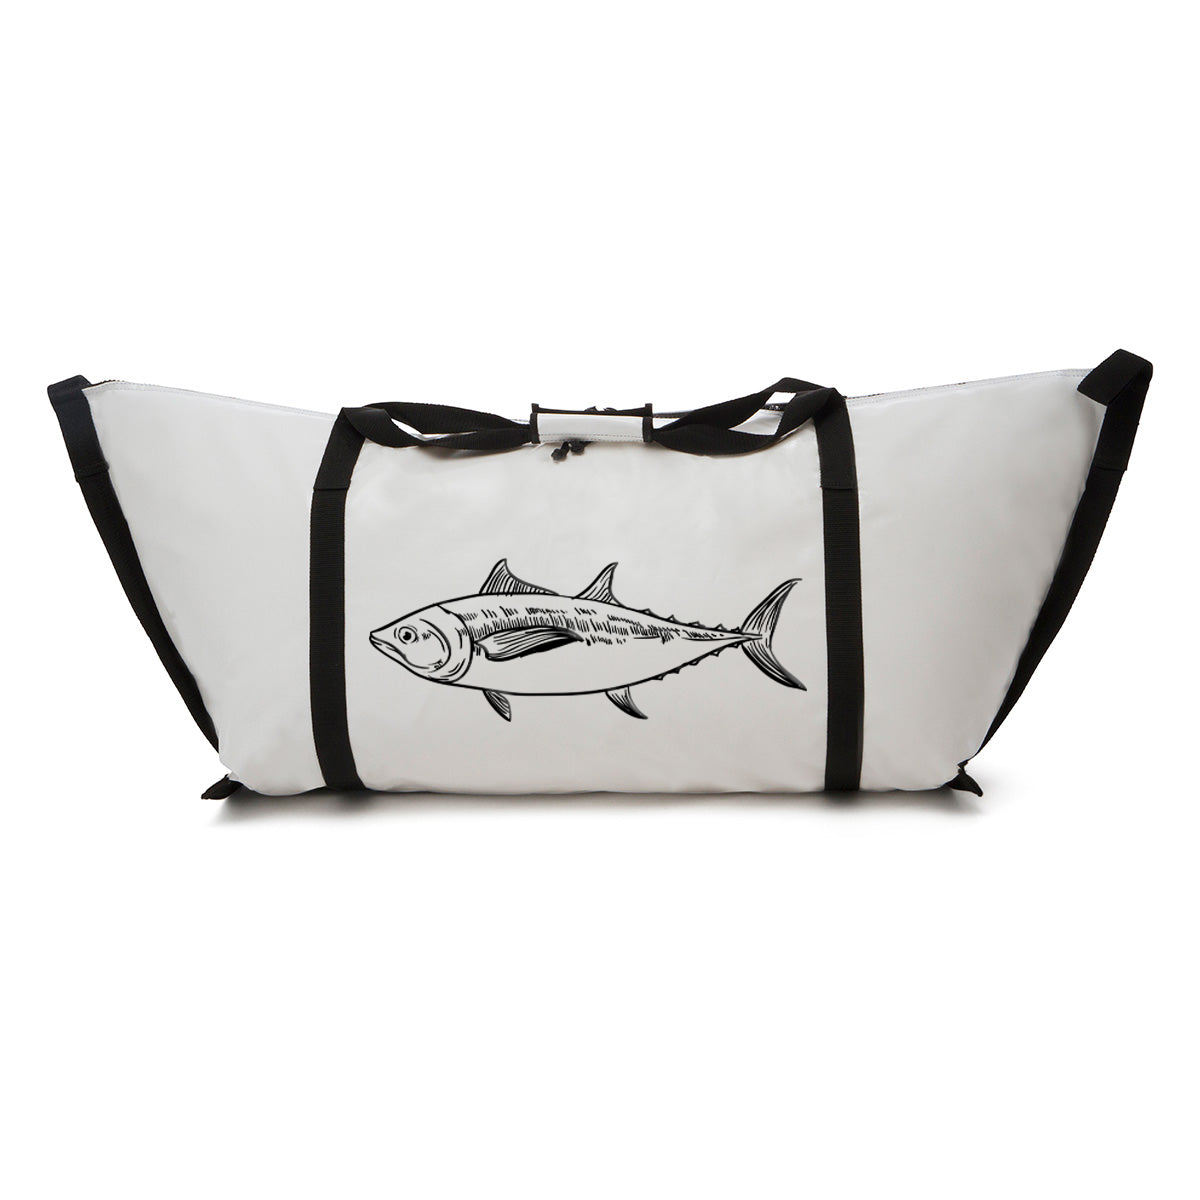 Custom Insulated Fish Bags Are Available From Suppliers